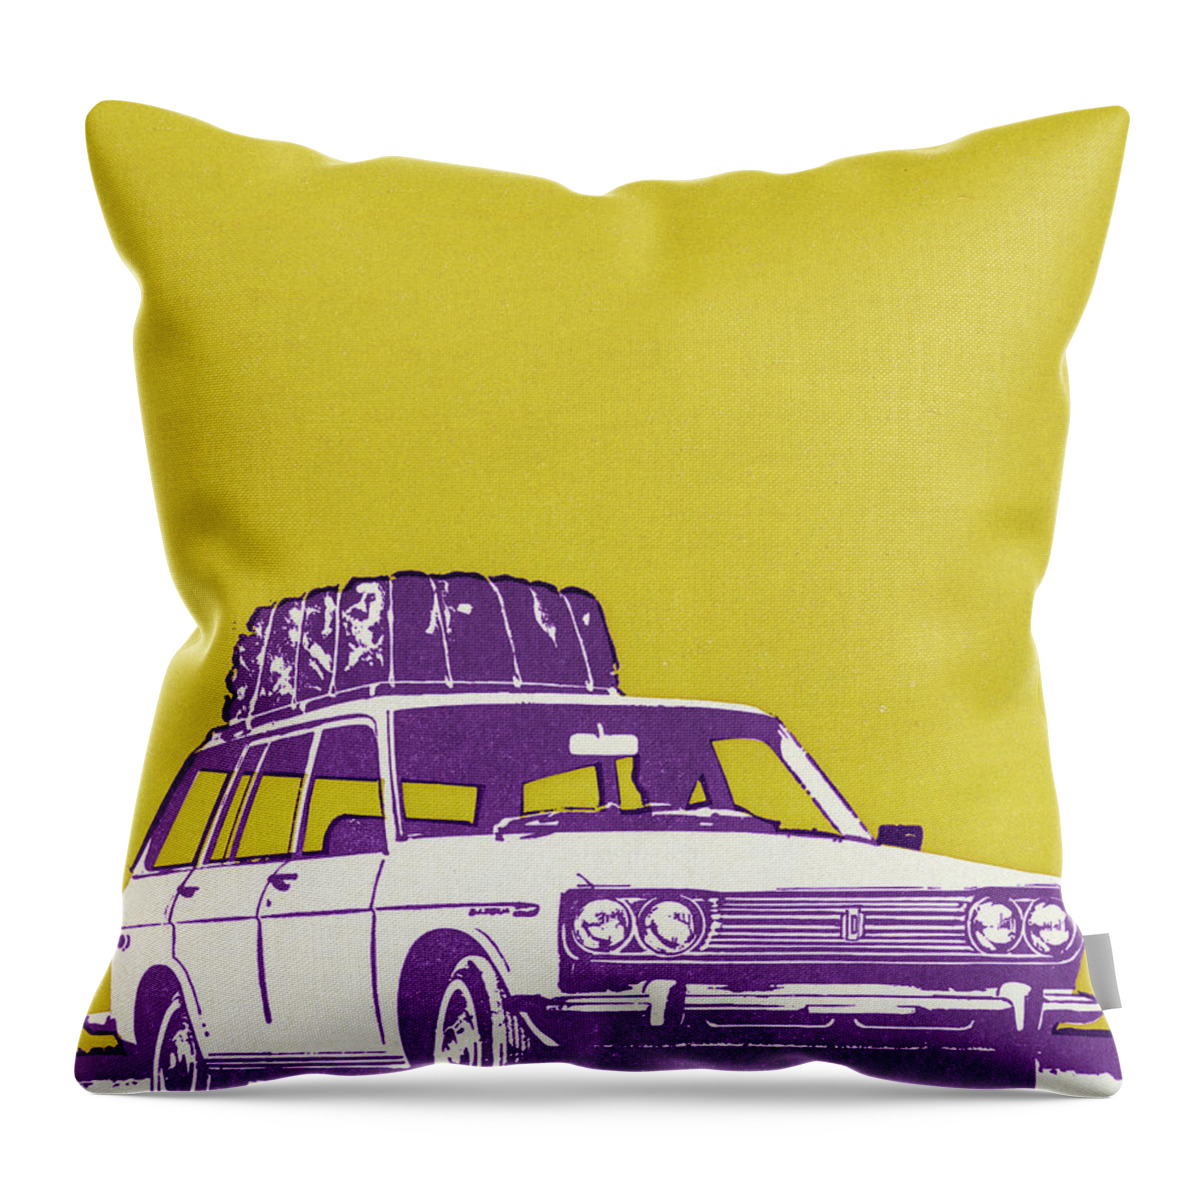 Auto Throw Pillow featuring the drawing Car With Package on Roof by CSA Images